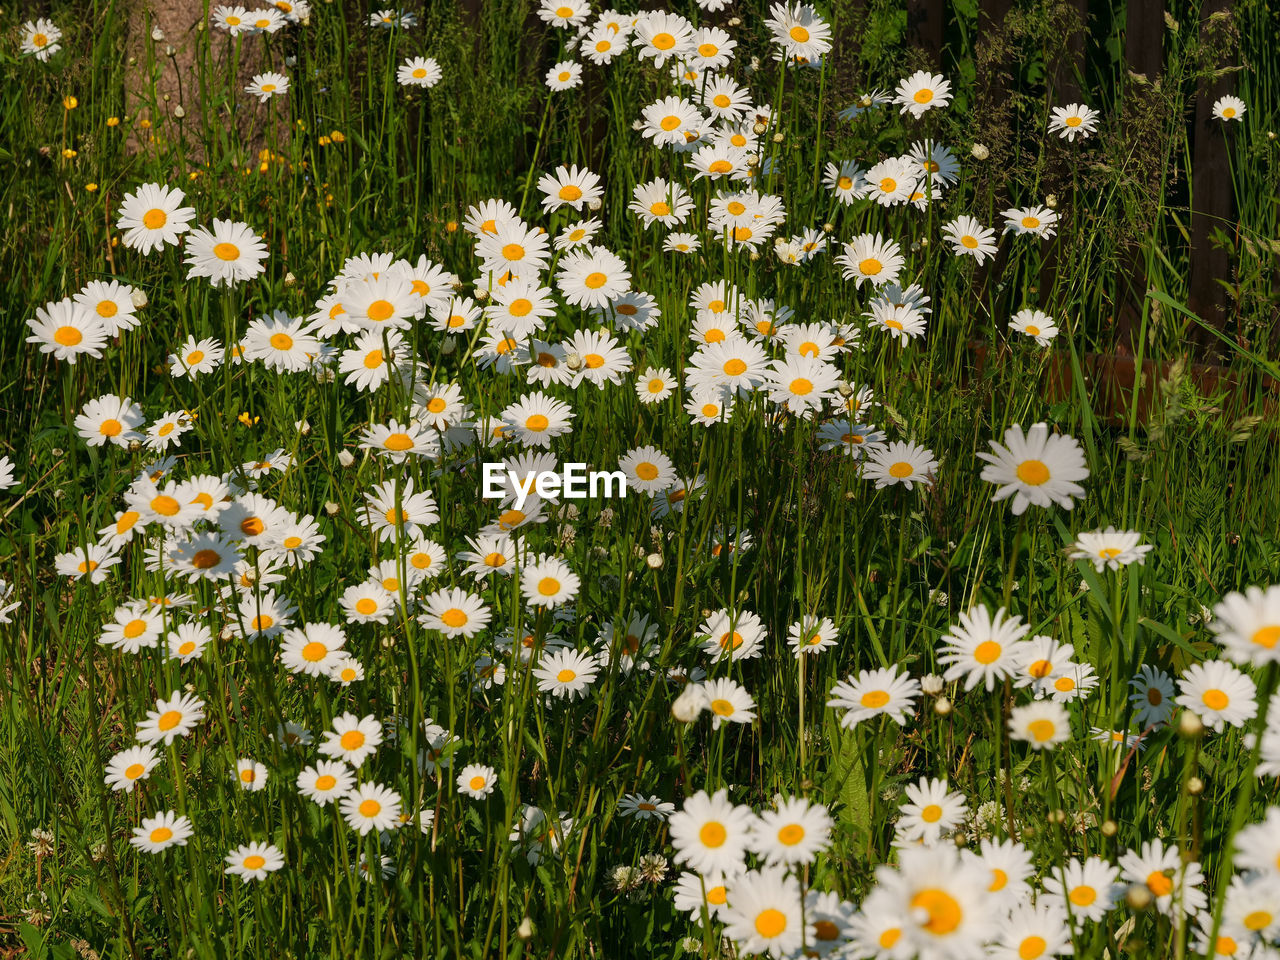 CLOSE-UP OF DAISIES ON FIELD